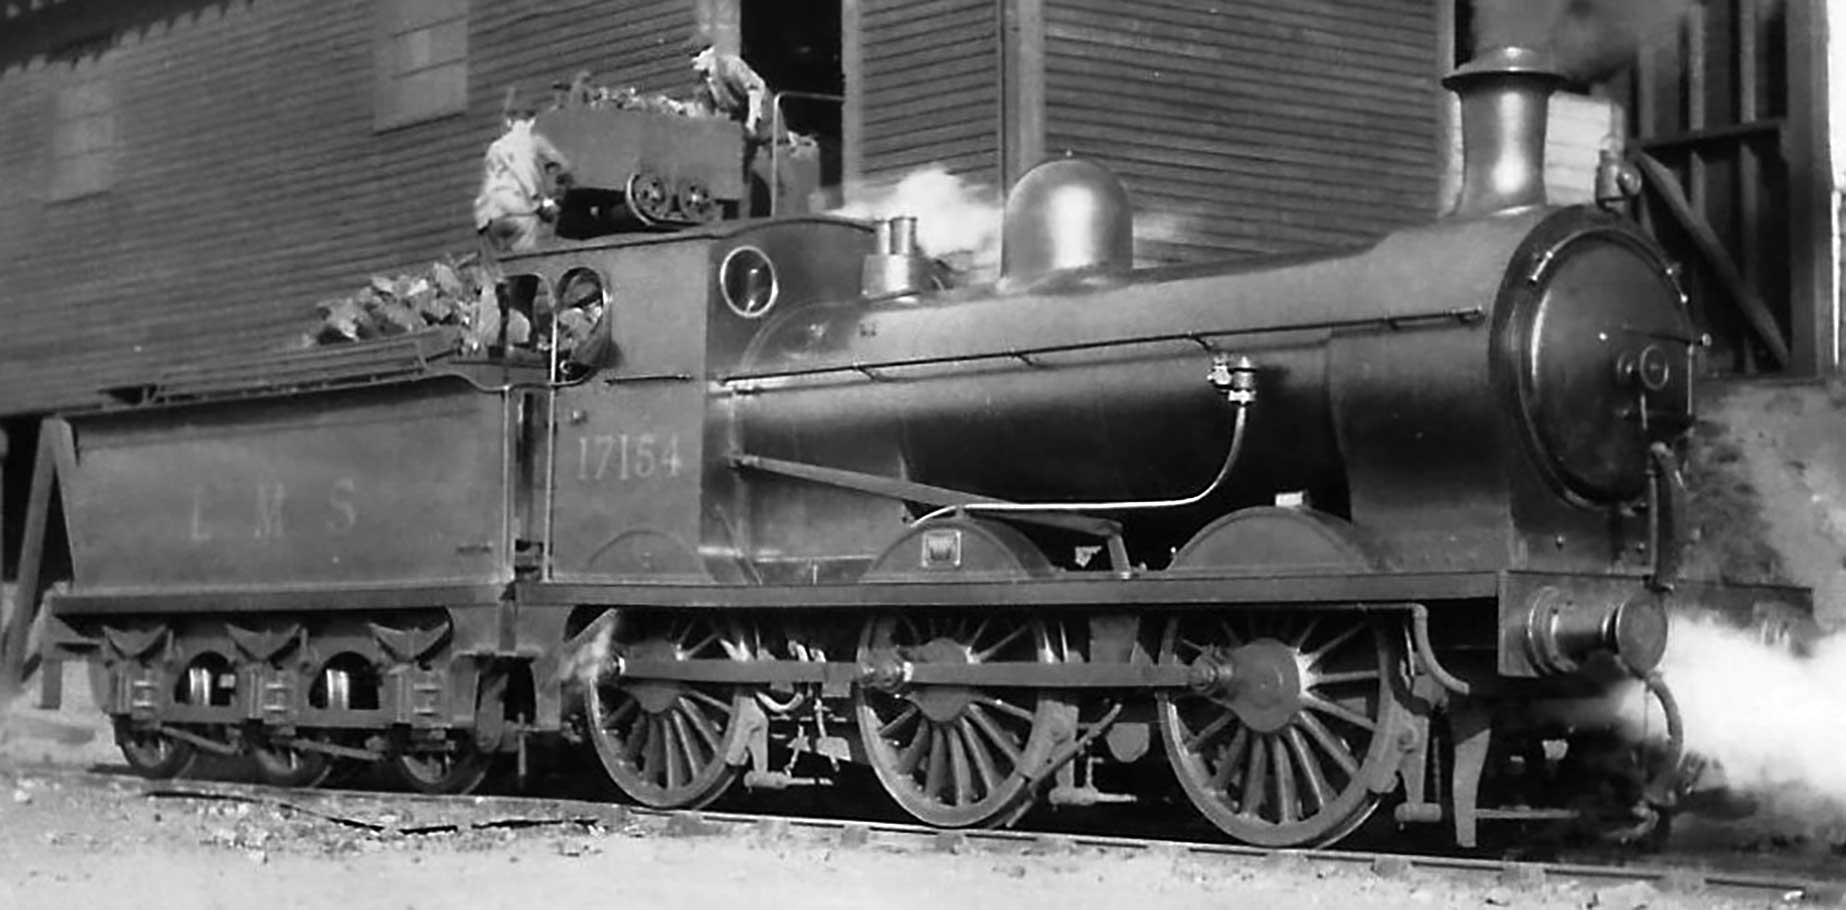 Photo showing Ex-GSWR 0-6-0 Class 22 of 1890 as LMS No. 17154